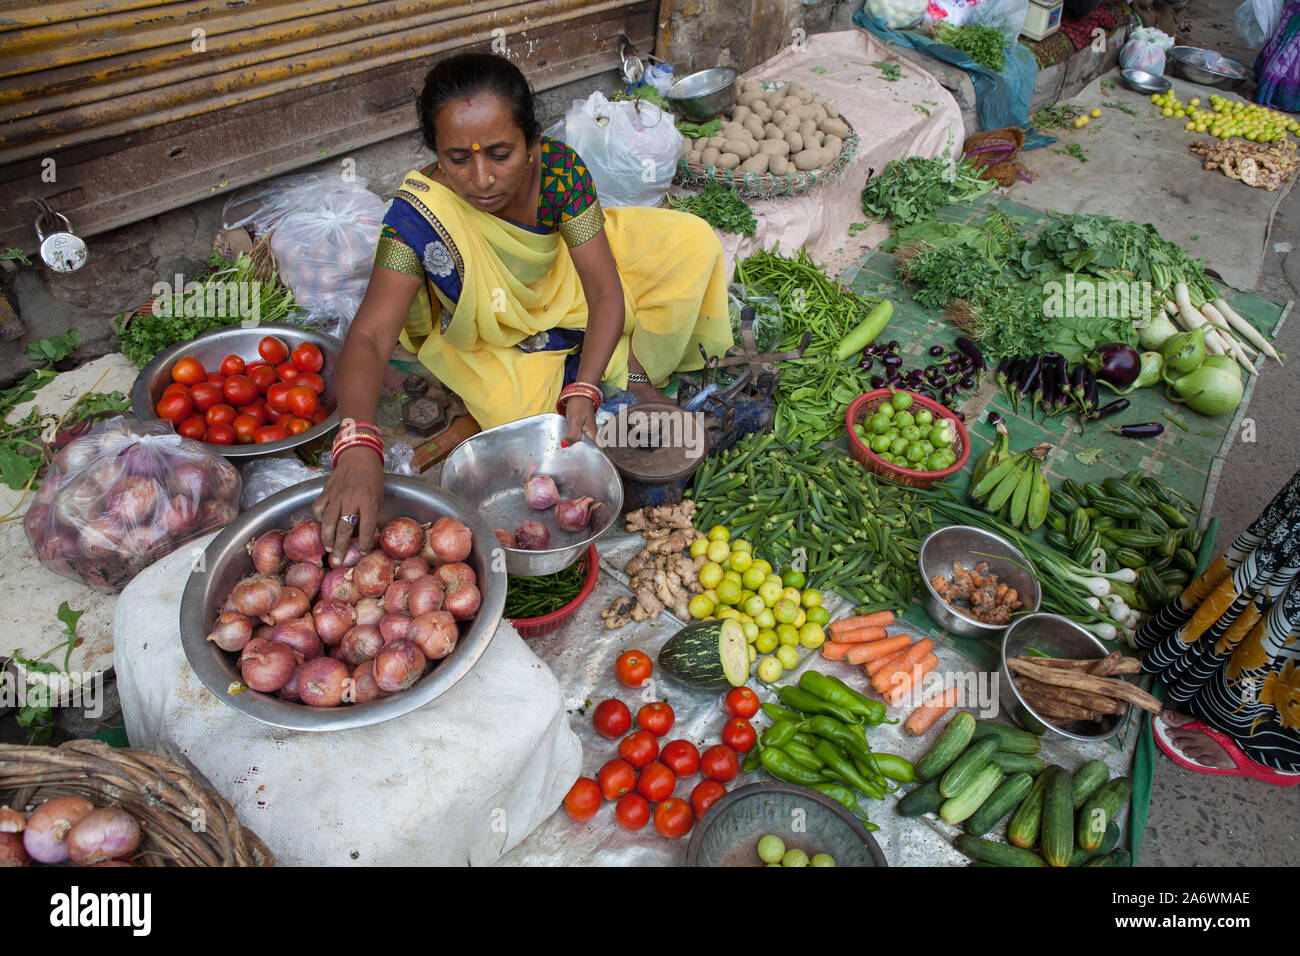 Vendor selling vegetables in the old city of Delhi Stock Photo